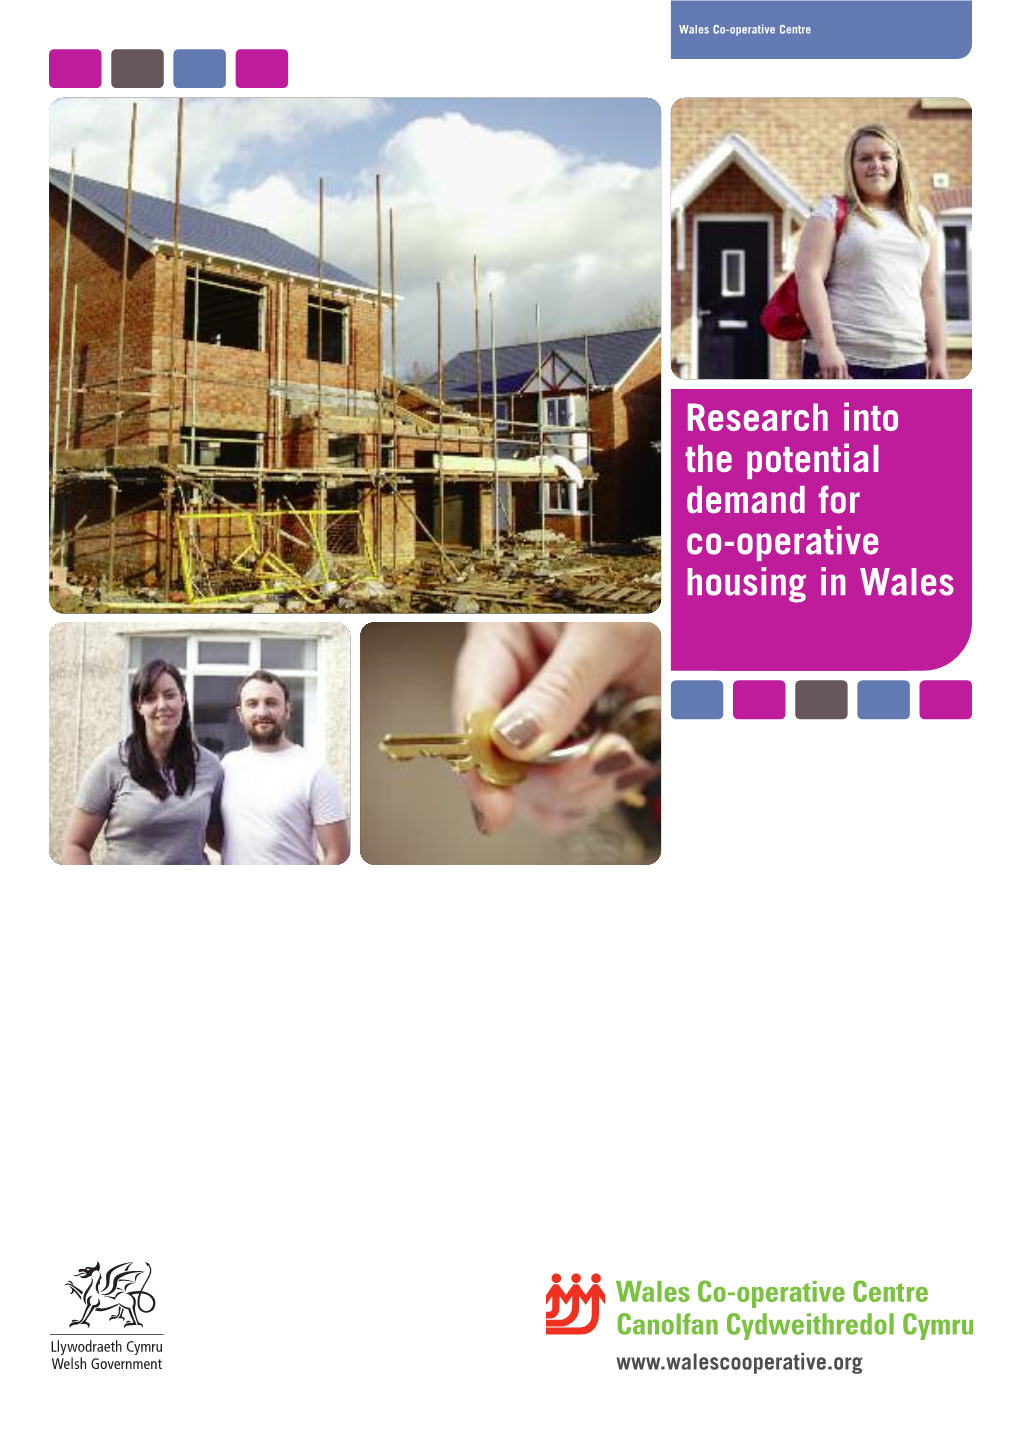 Research Into the Potential Demand for Co-Operative Housing in Wales